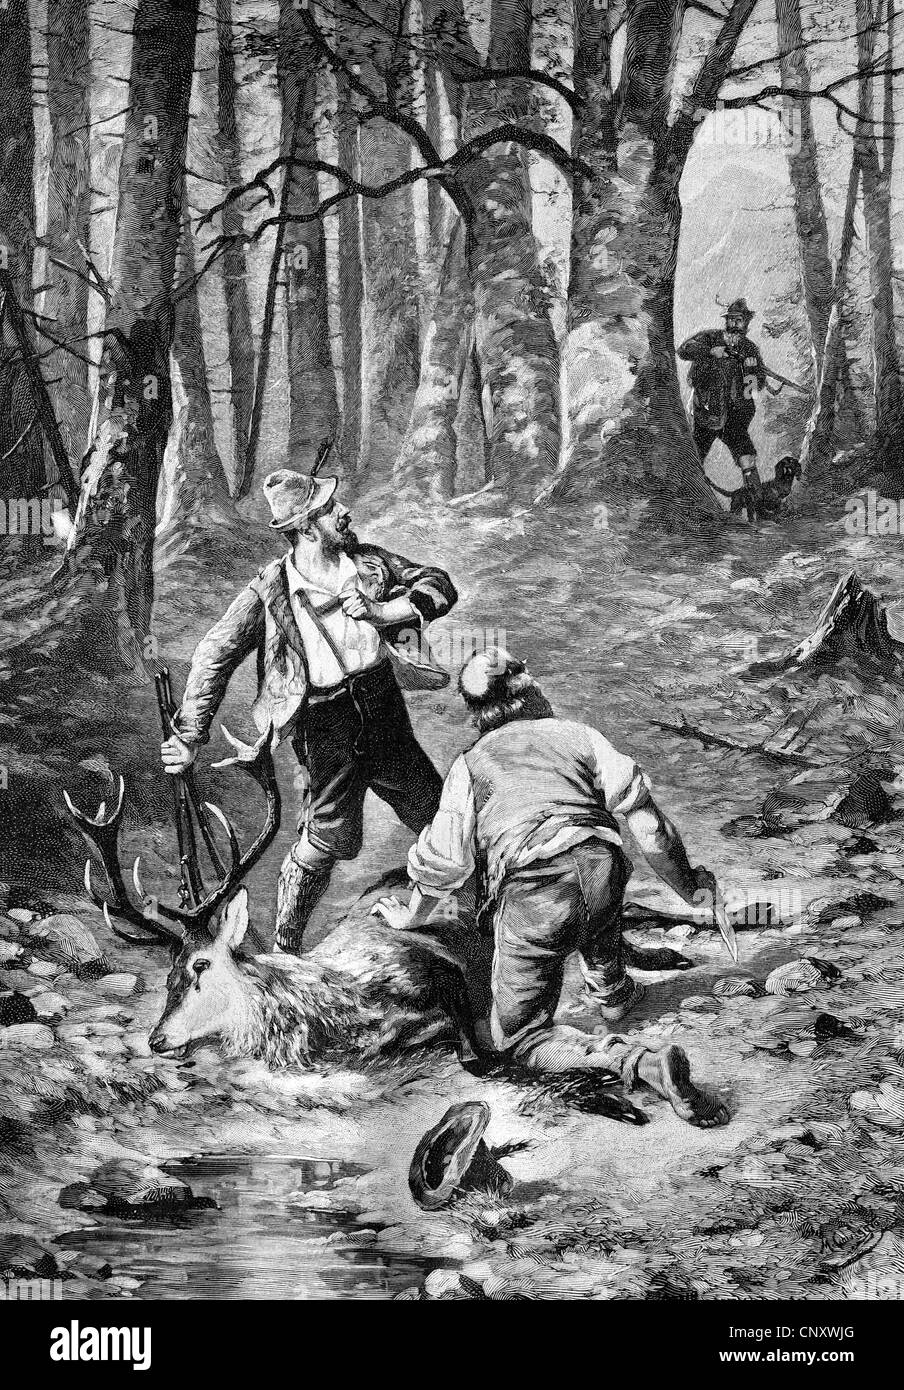 Caught poachers, historical illustration, wood engraving, about 1888 Stock Photo